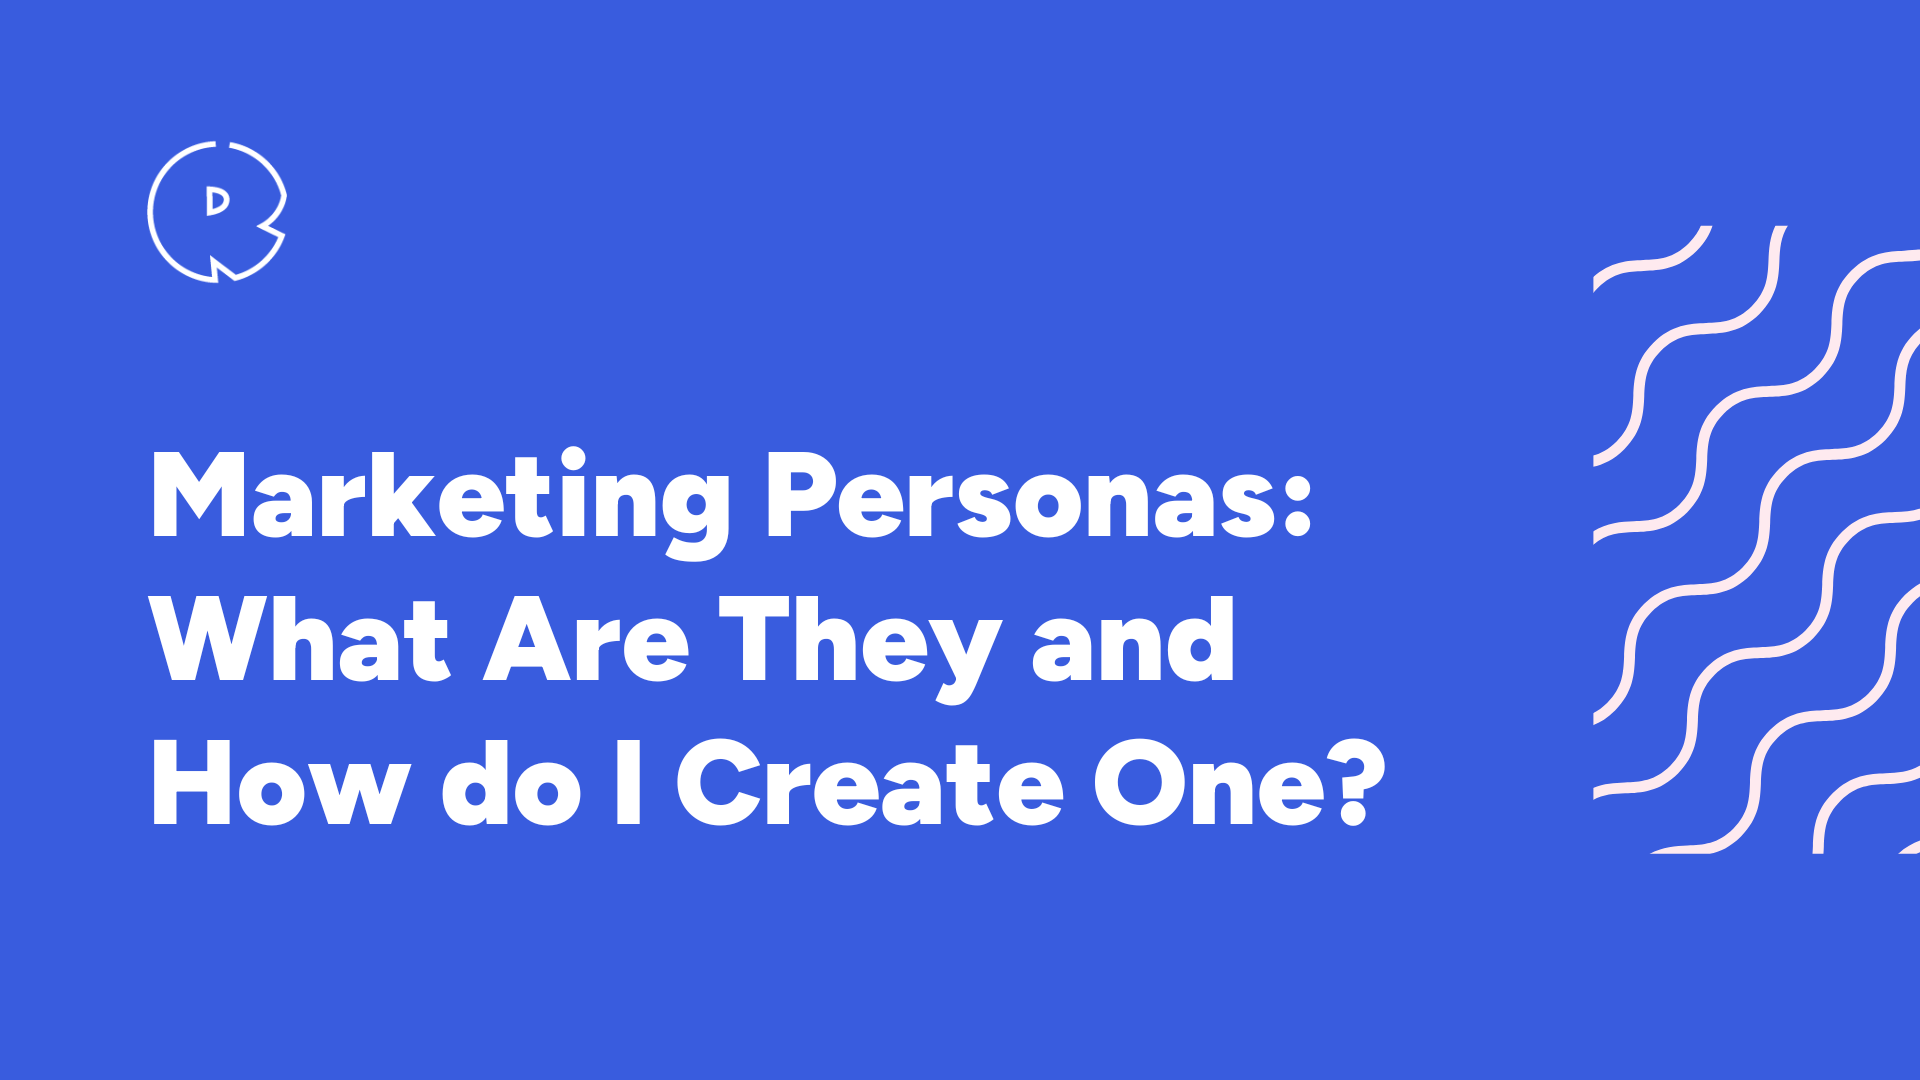 Marketing Personas: What Are They and How do I Create One?